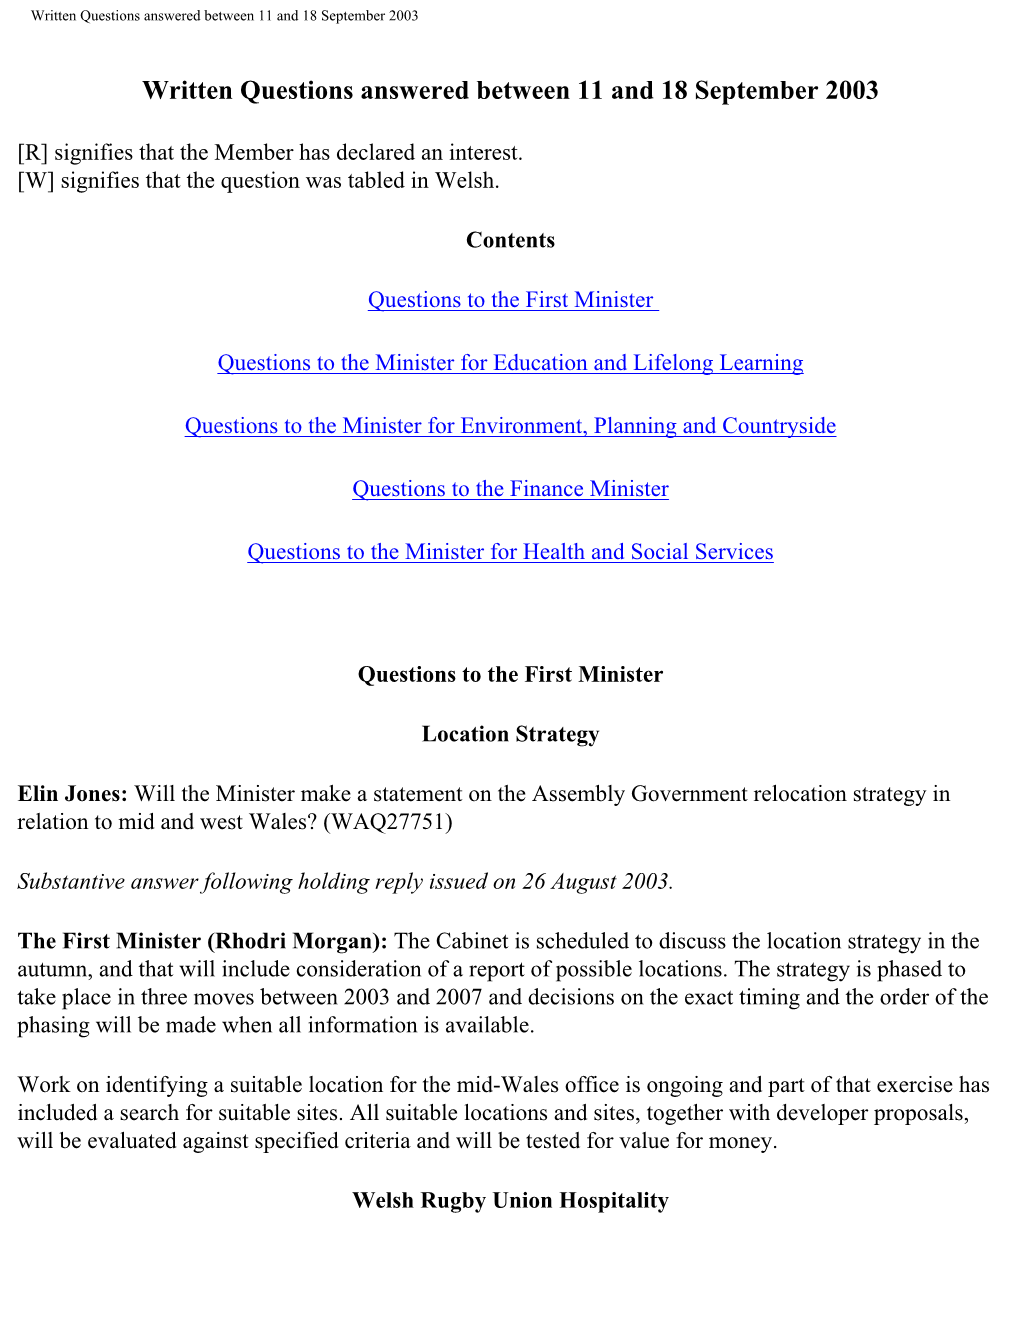 Written Questions Answered Between 11 and 18 September 2003